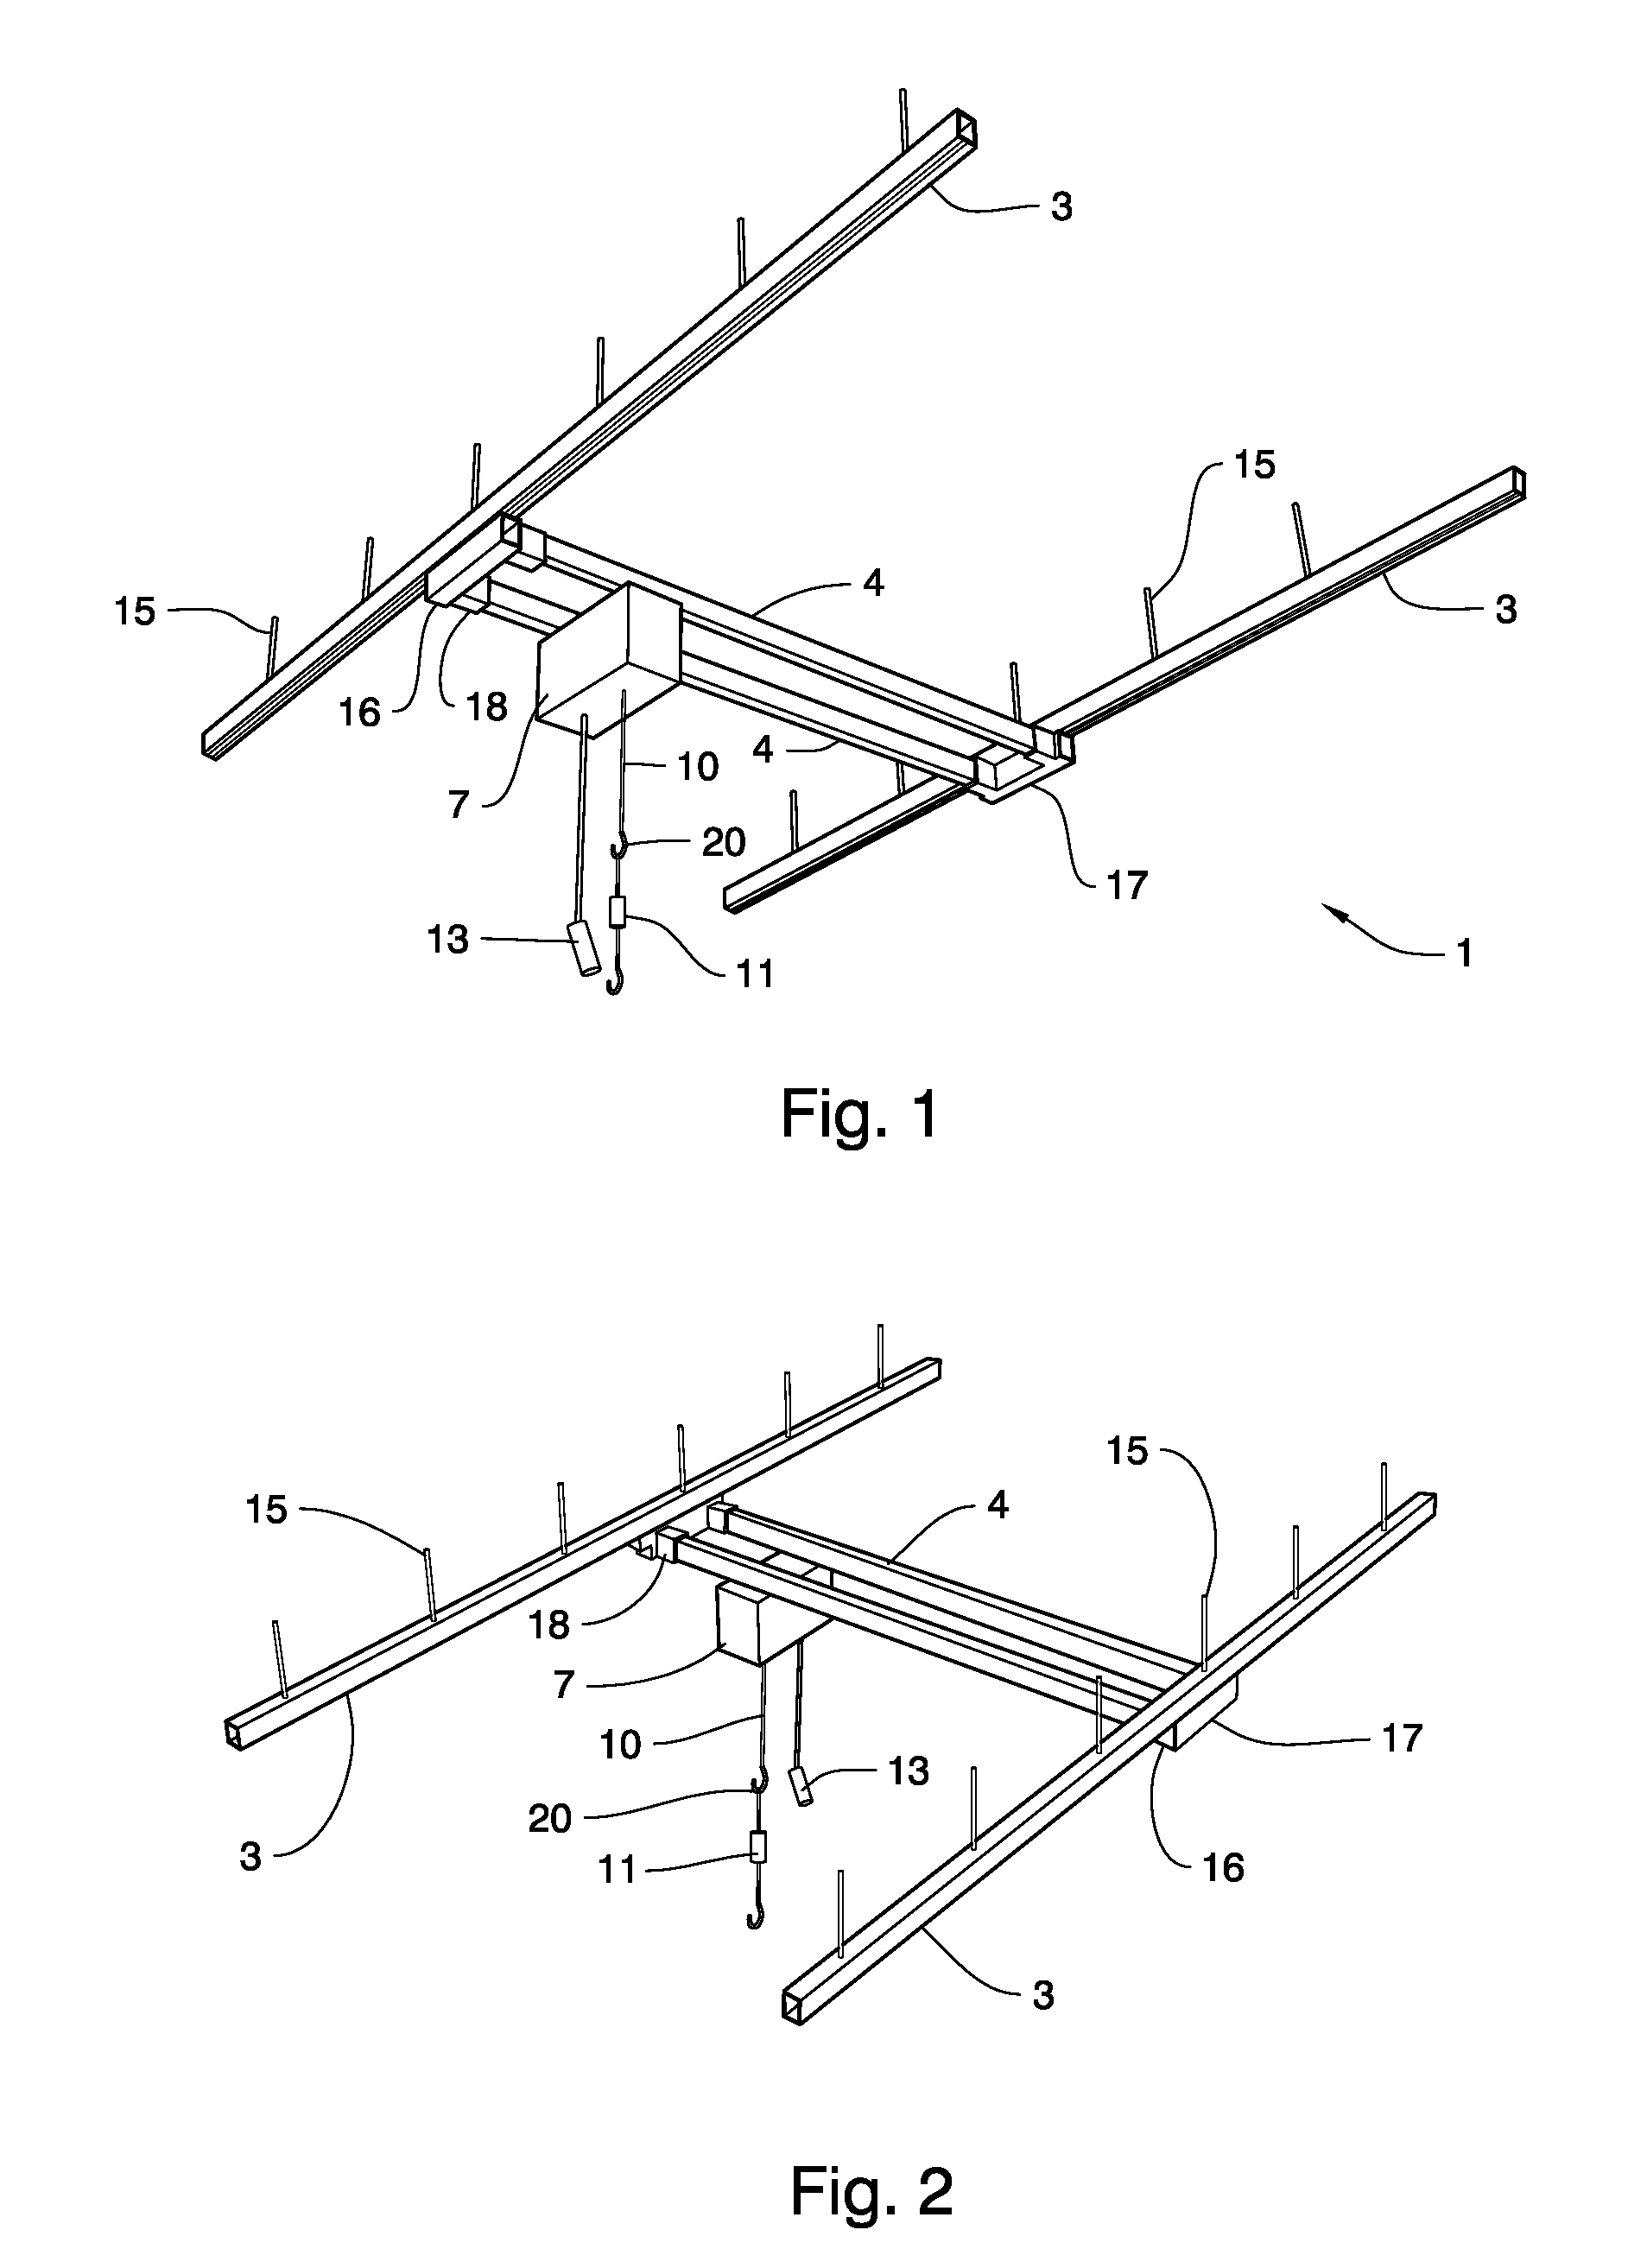 Controlled-suspension standing device for medical and veterinary use